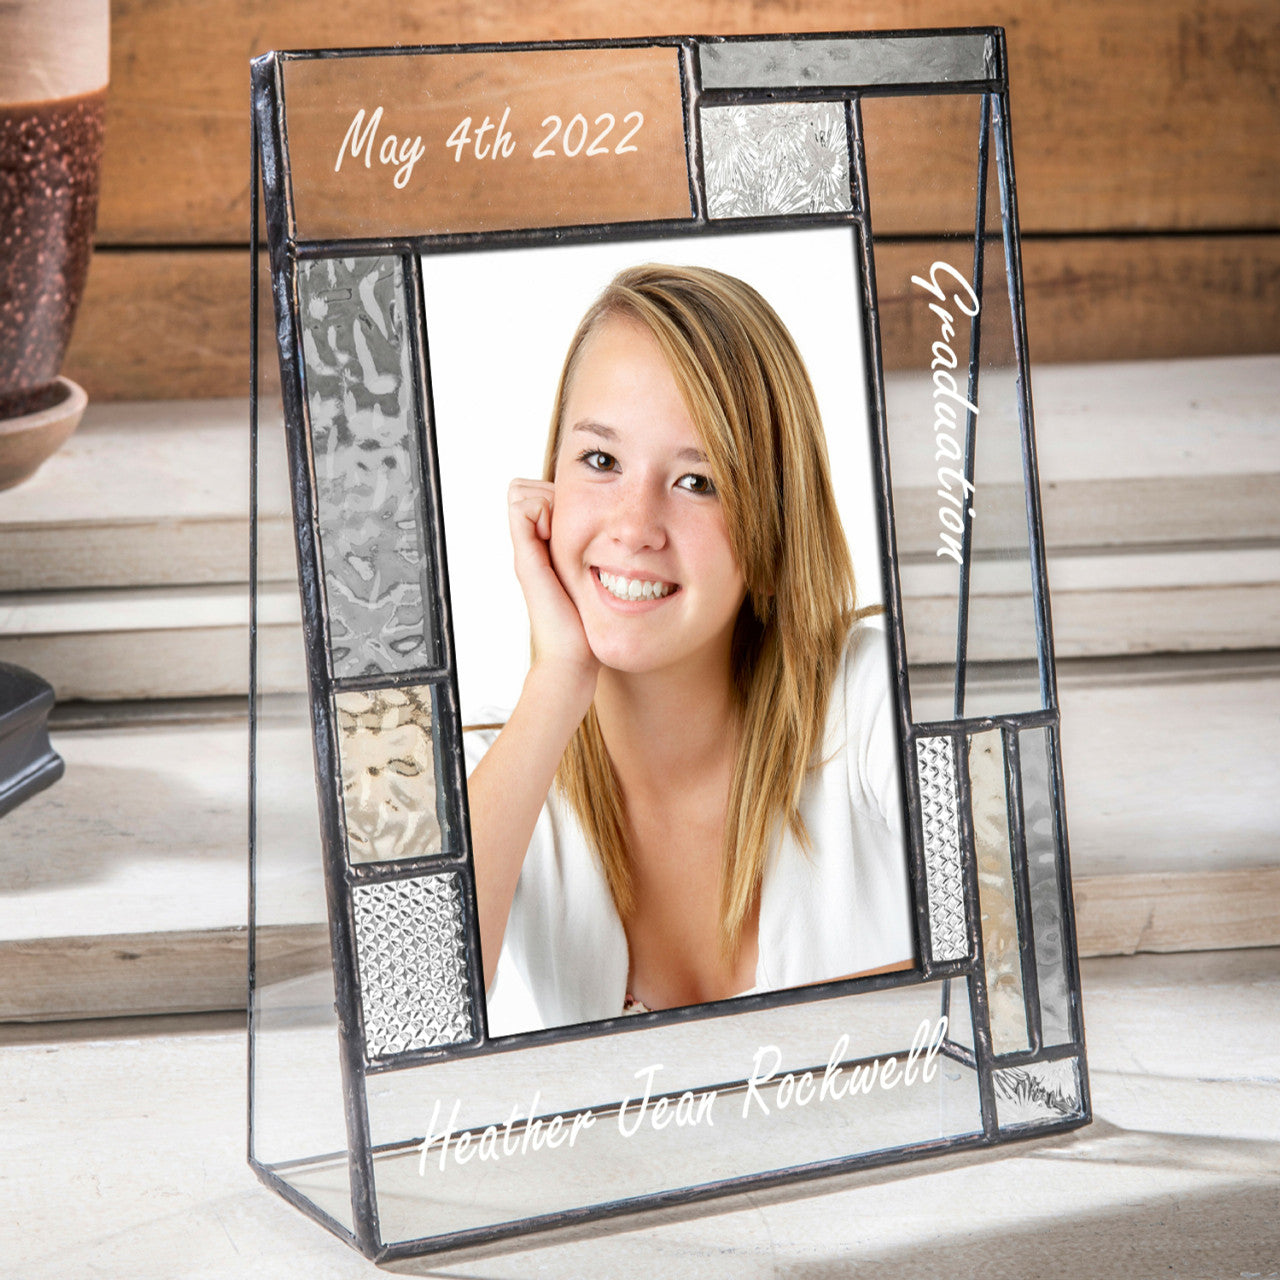 Personalized Graduation Gifts Picture Frames by J Devlin | Pic 392-46V EP613